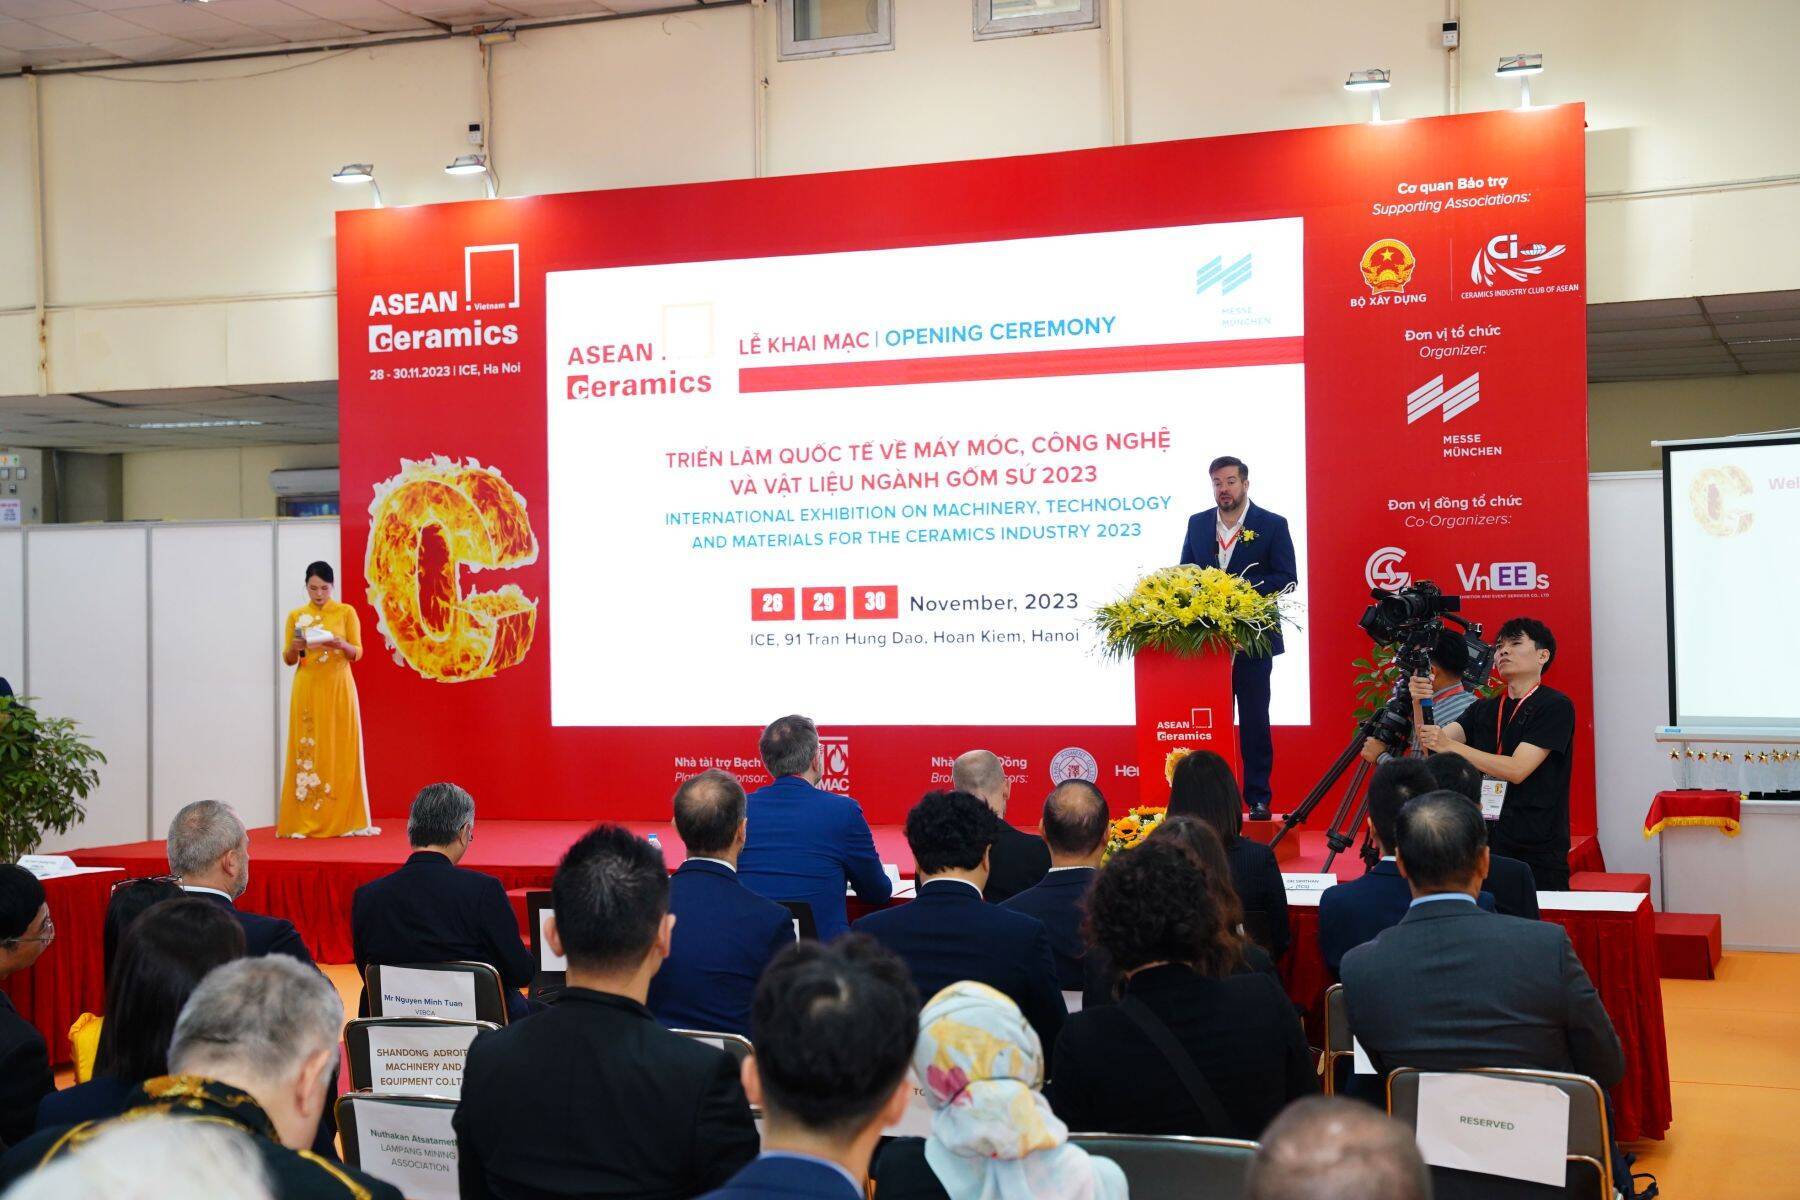 ASEAN Ceramic 2023 Opens with Record-Breaking Exhibitor Turnout and Appreciation Awards